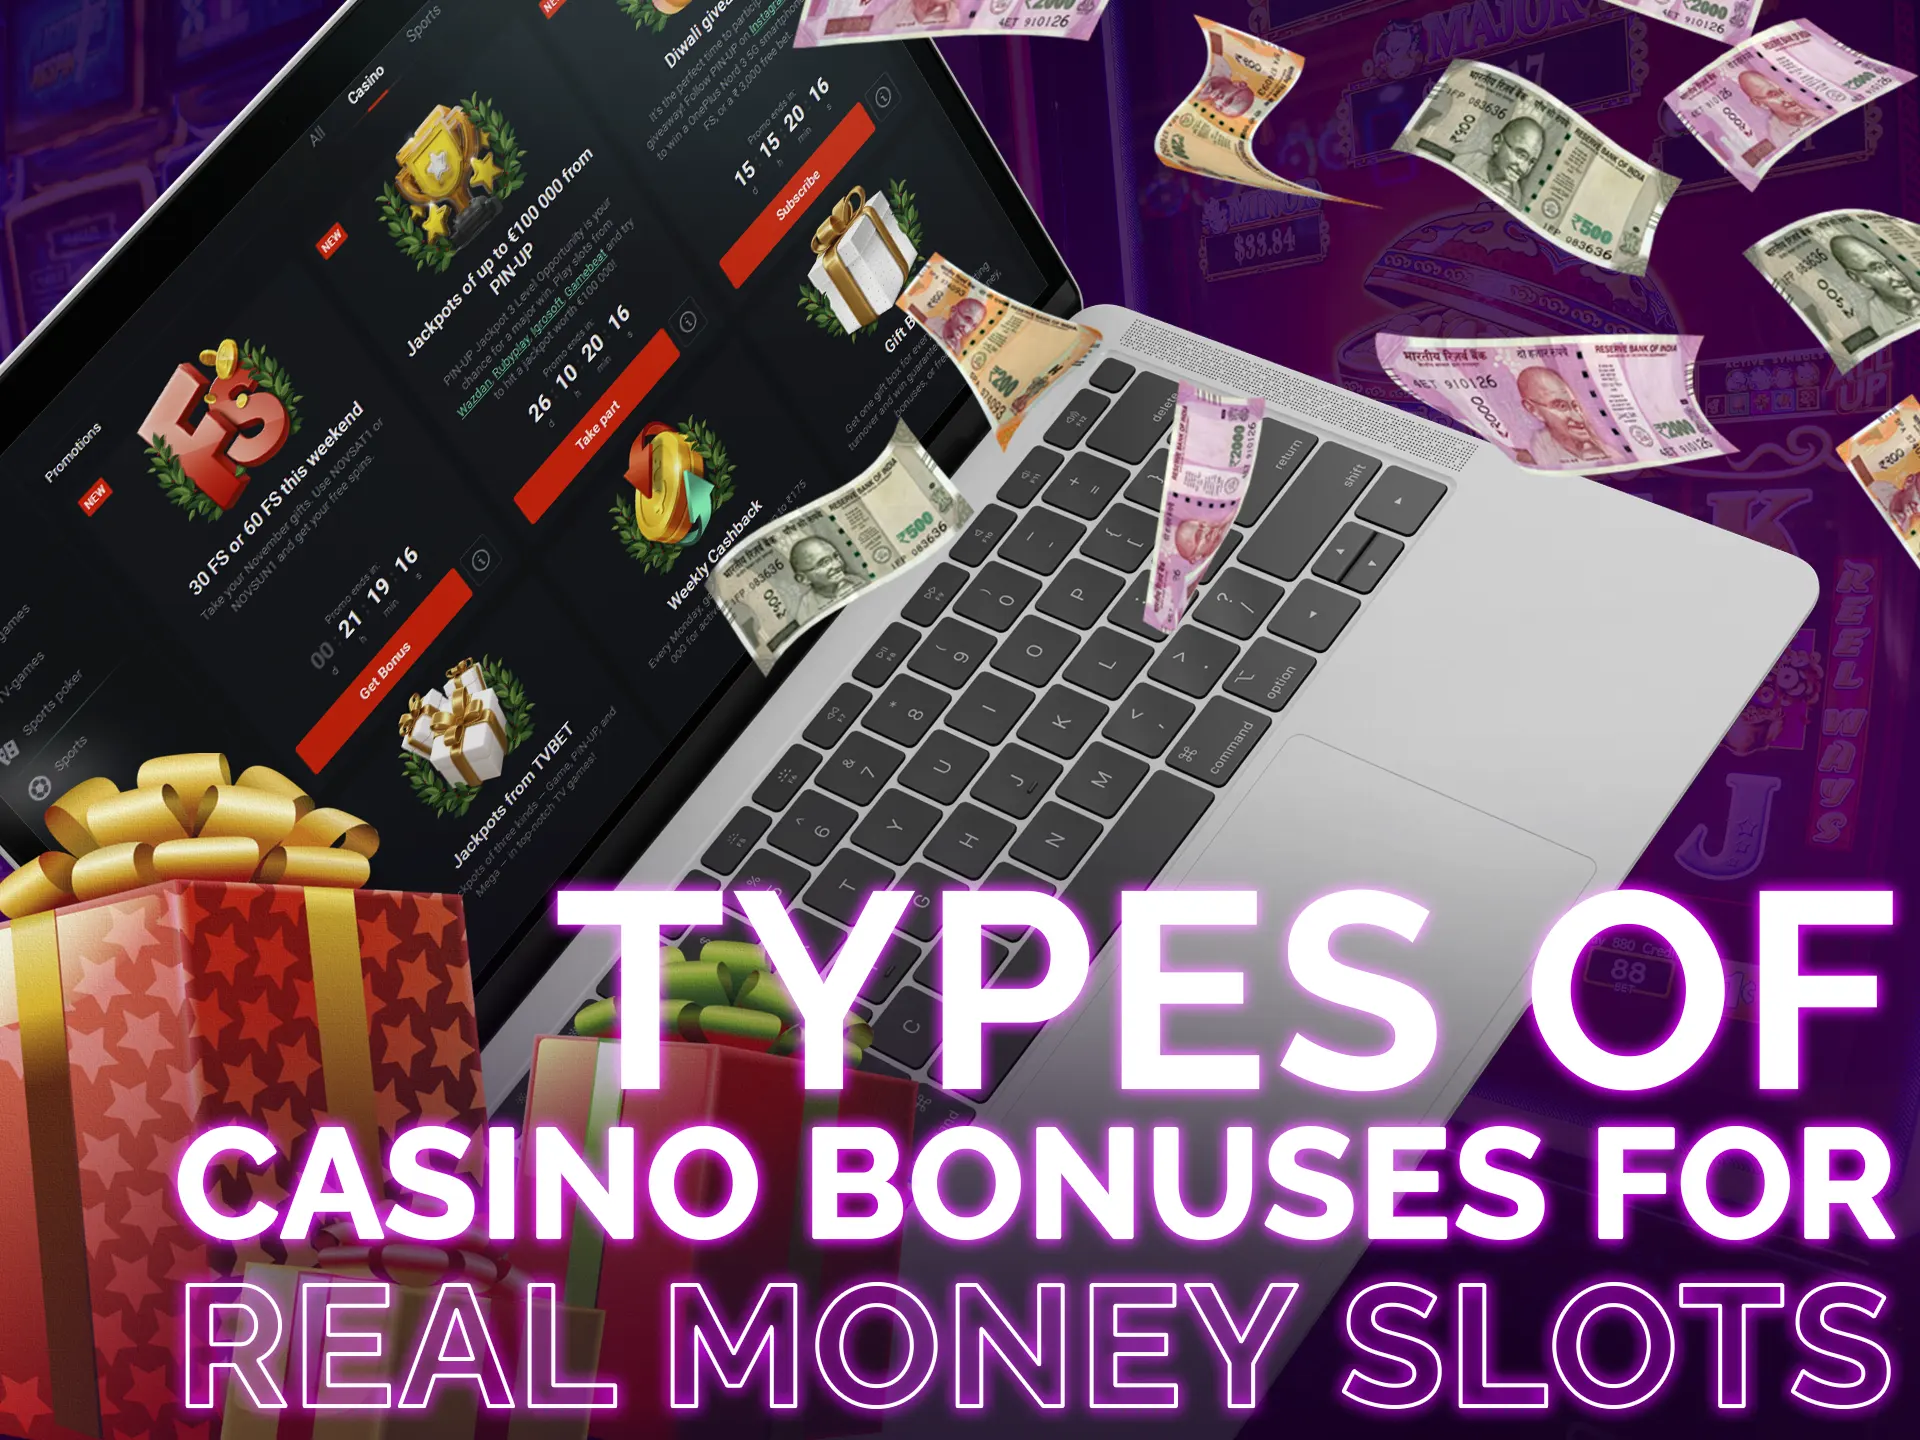 Take advantage of prizes and bonuses for a more rewarding game at Real Money Slots.